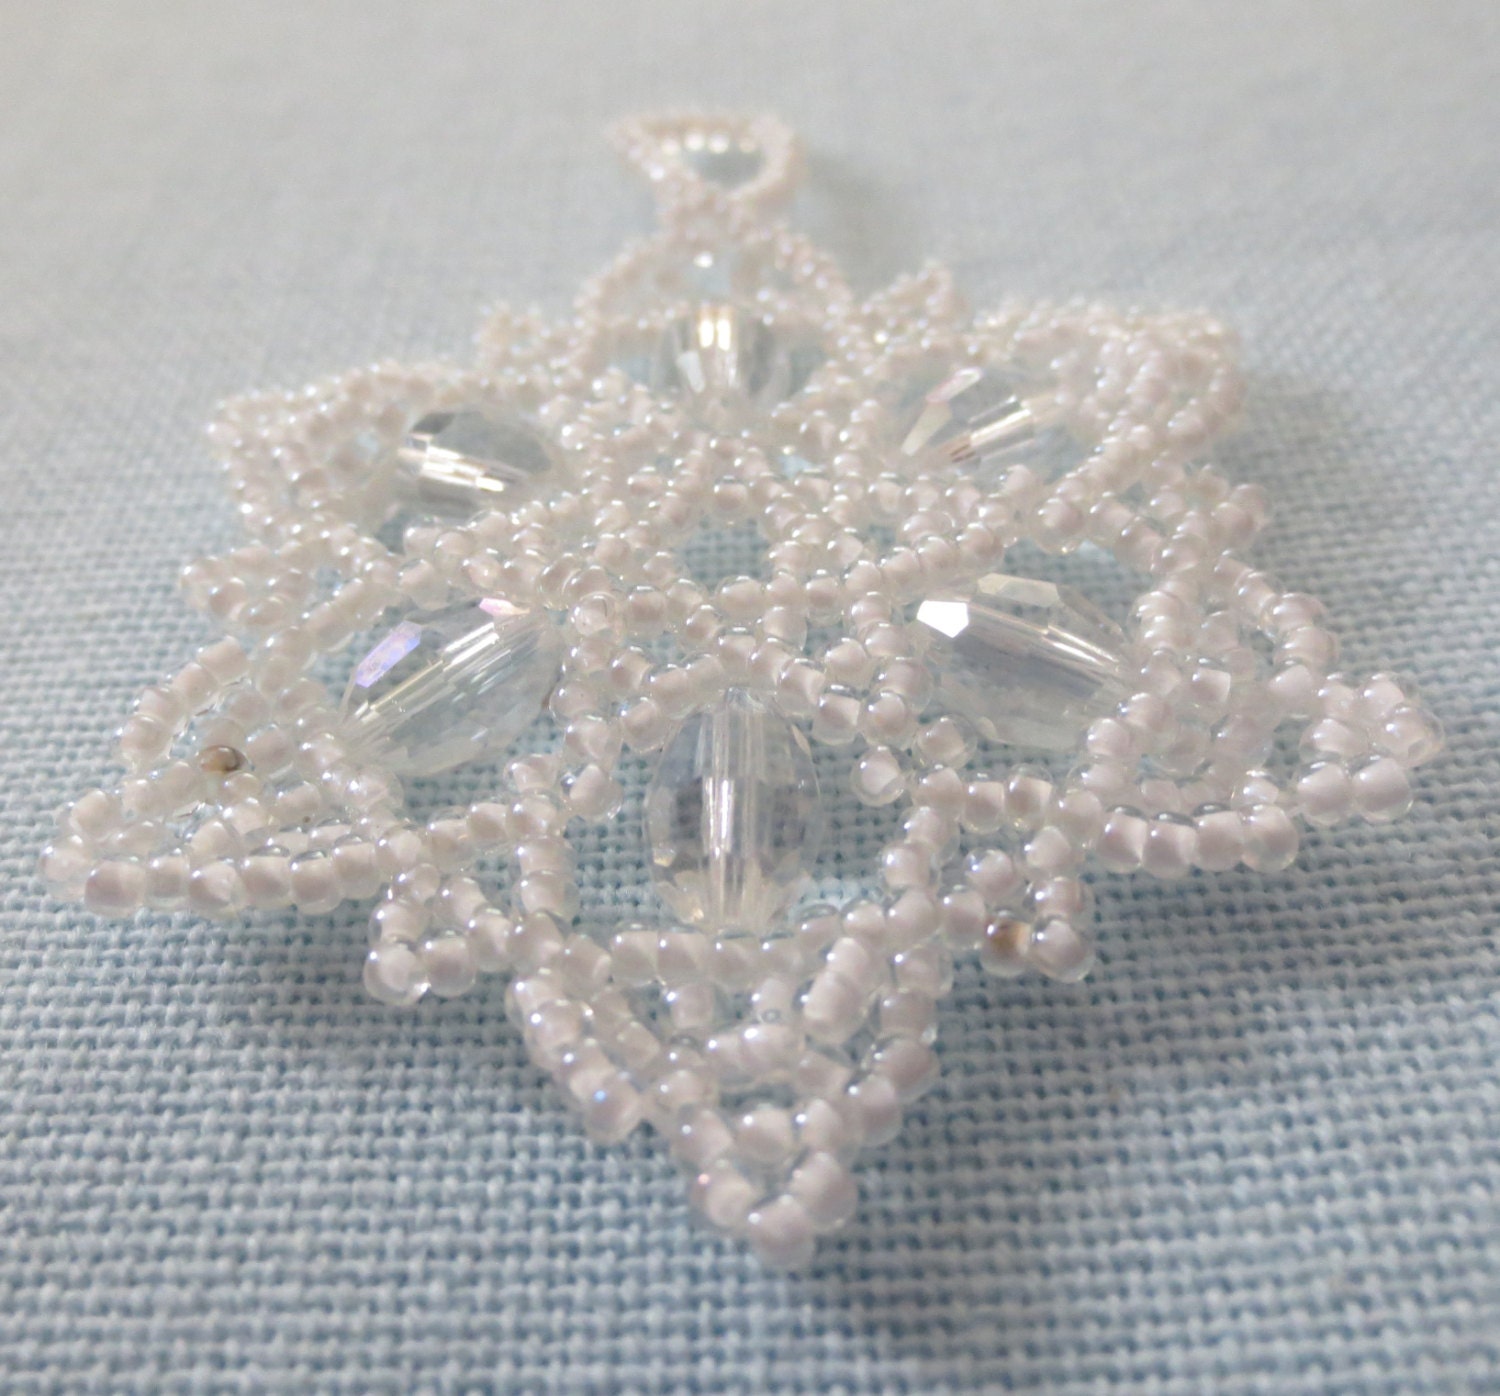 Bead and crystal snowflake / wreath ornament. White and crystal